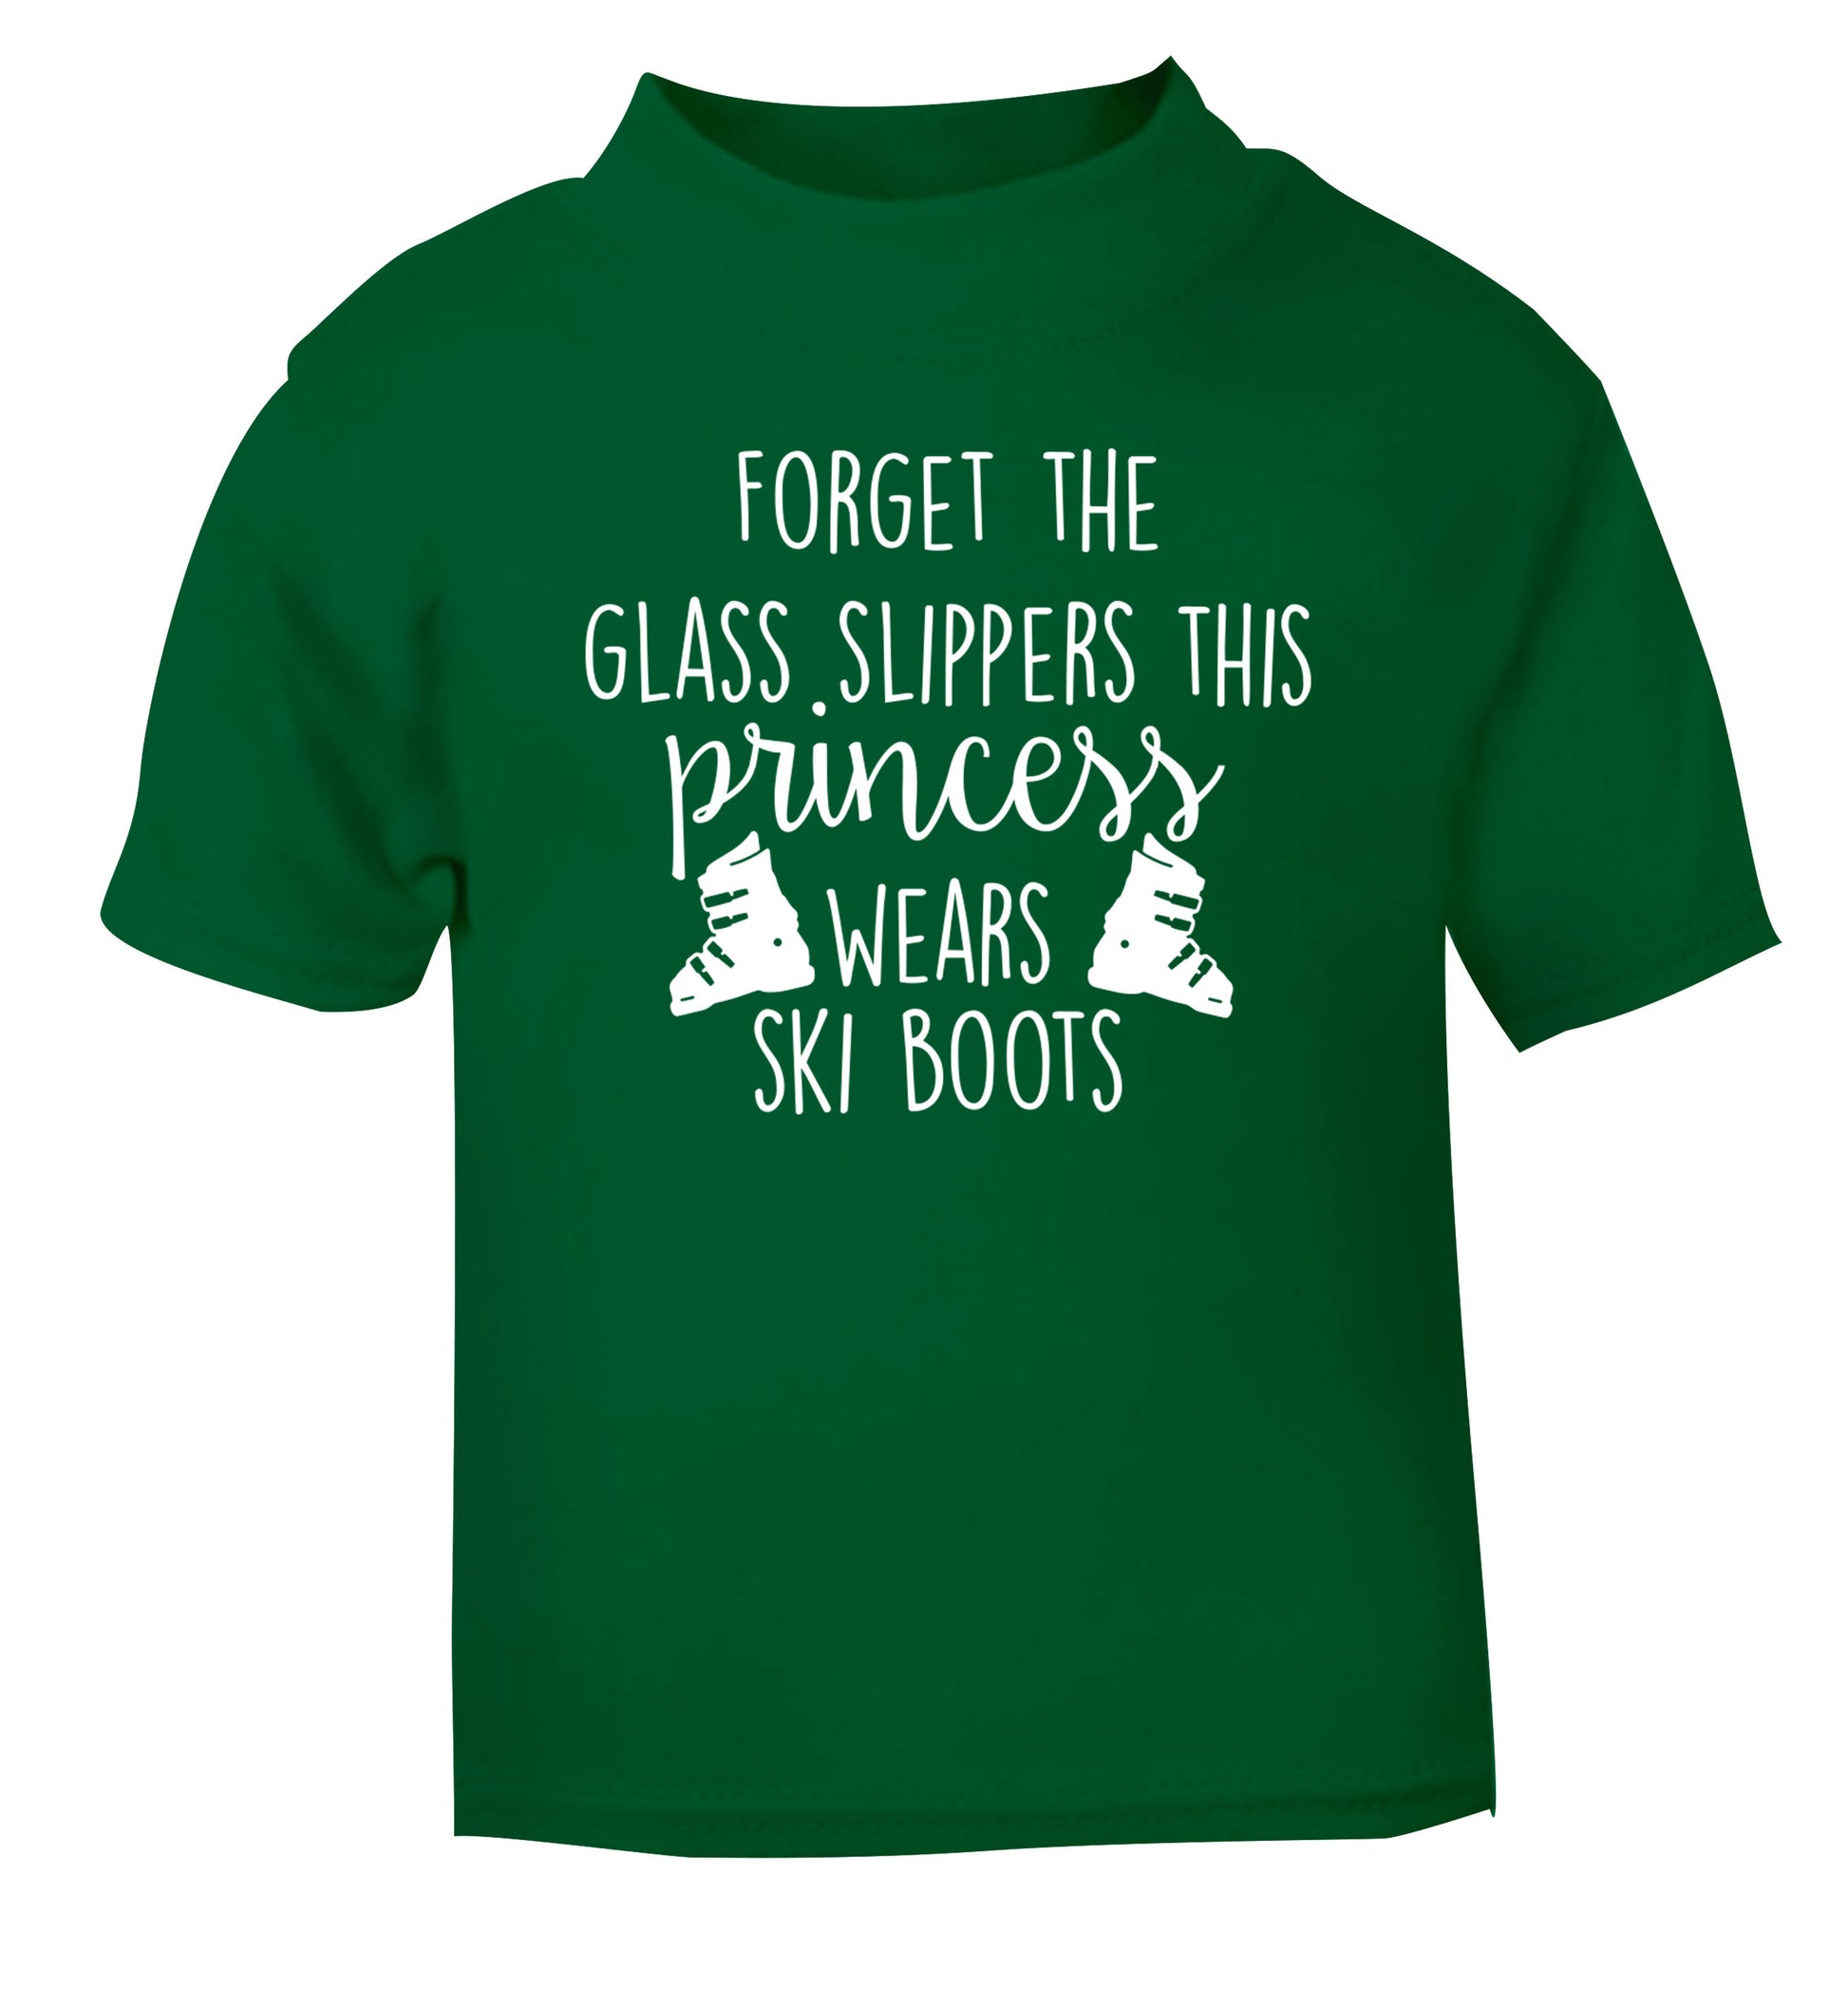 Forget the glass slippers this princess wears ski boots green Baby Toddler Tshirt 2 Years